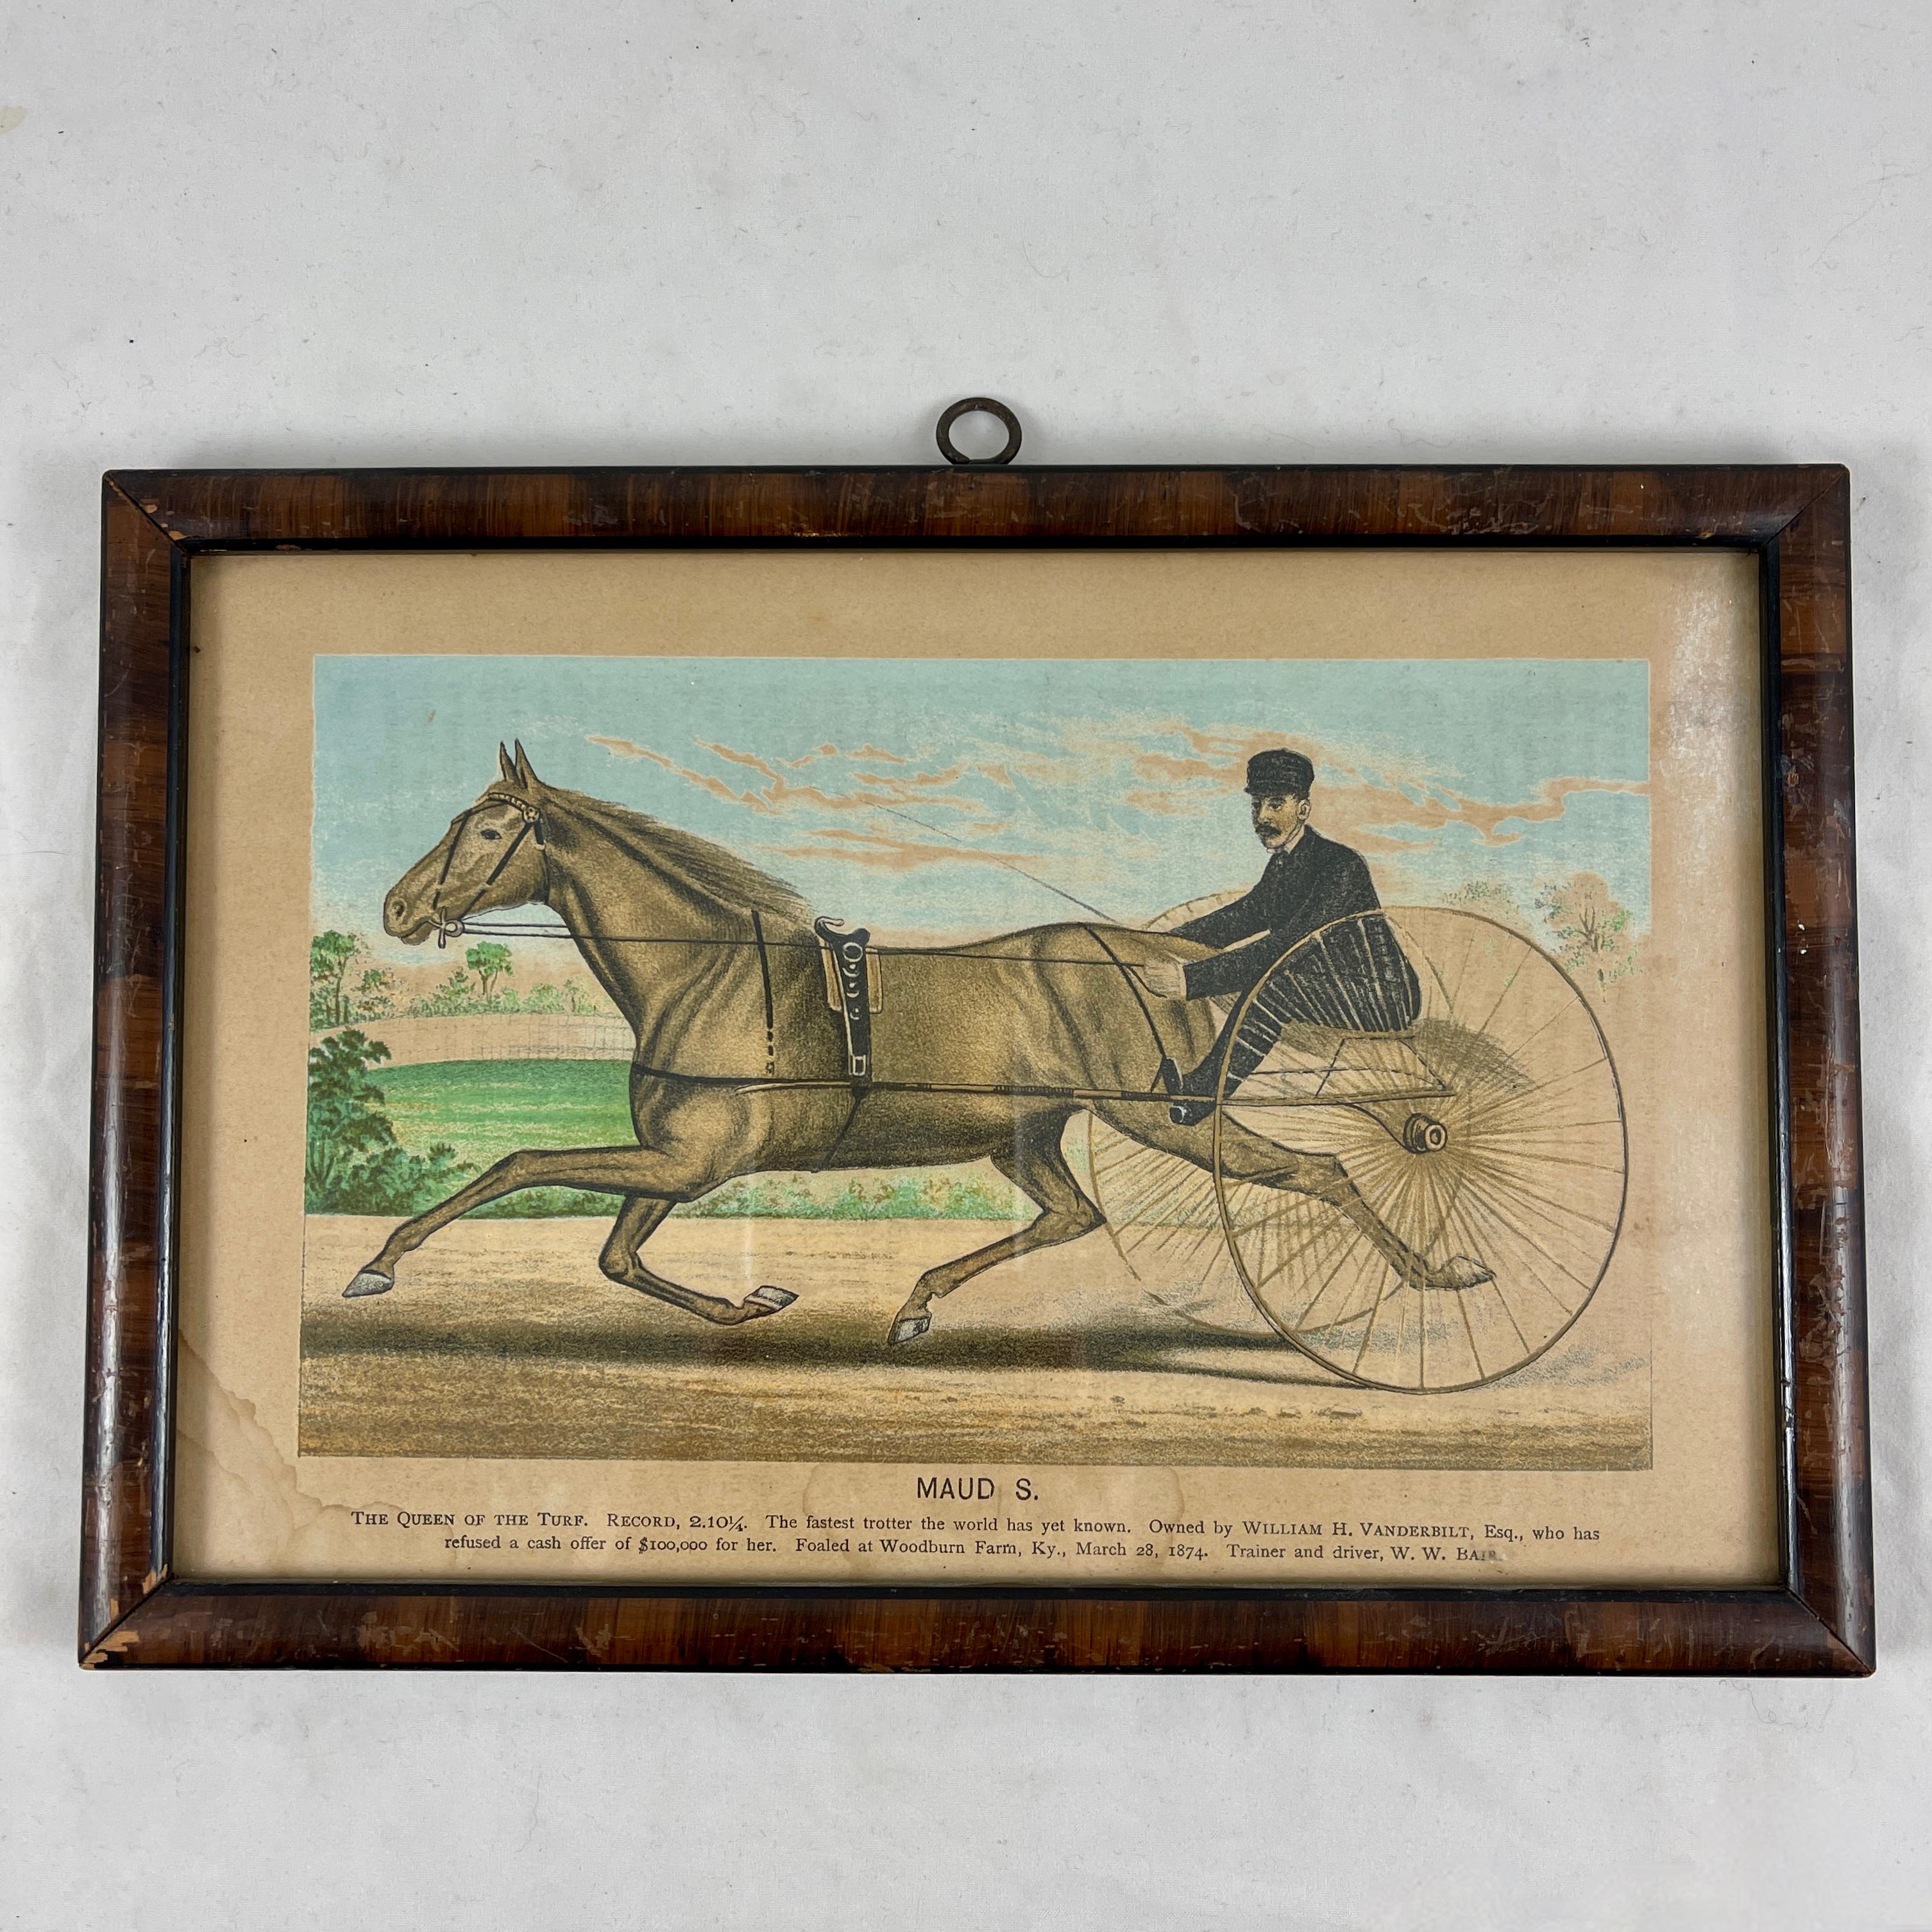 Wood Framed Race Horse Champions Original Chromolithographs Printed in 1882, Set /3